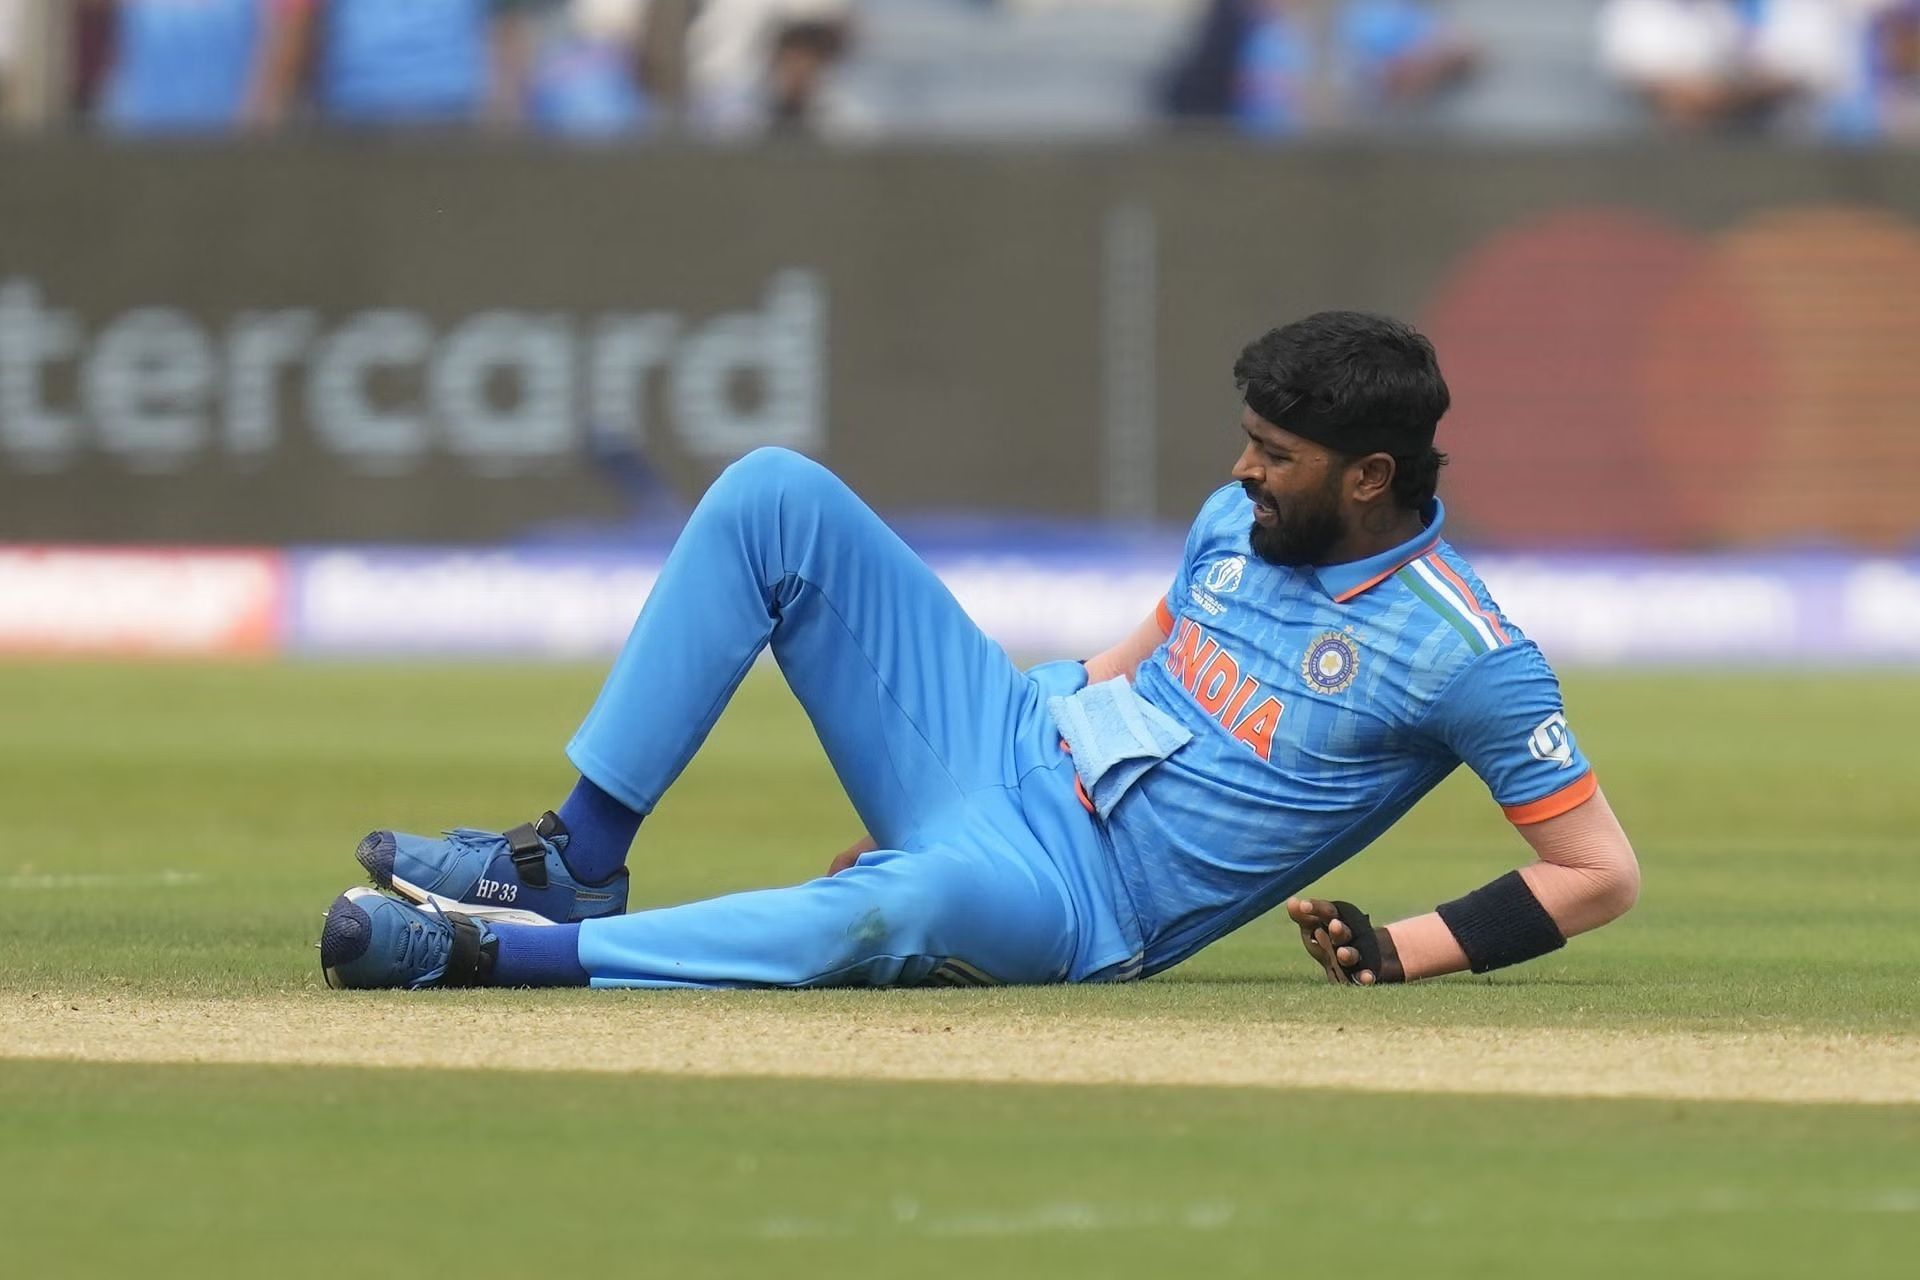 Hardik Pandya has been ruled out of the remainder of the ongoing World Cup. [P/C: AP]